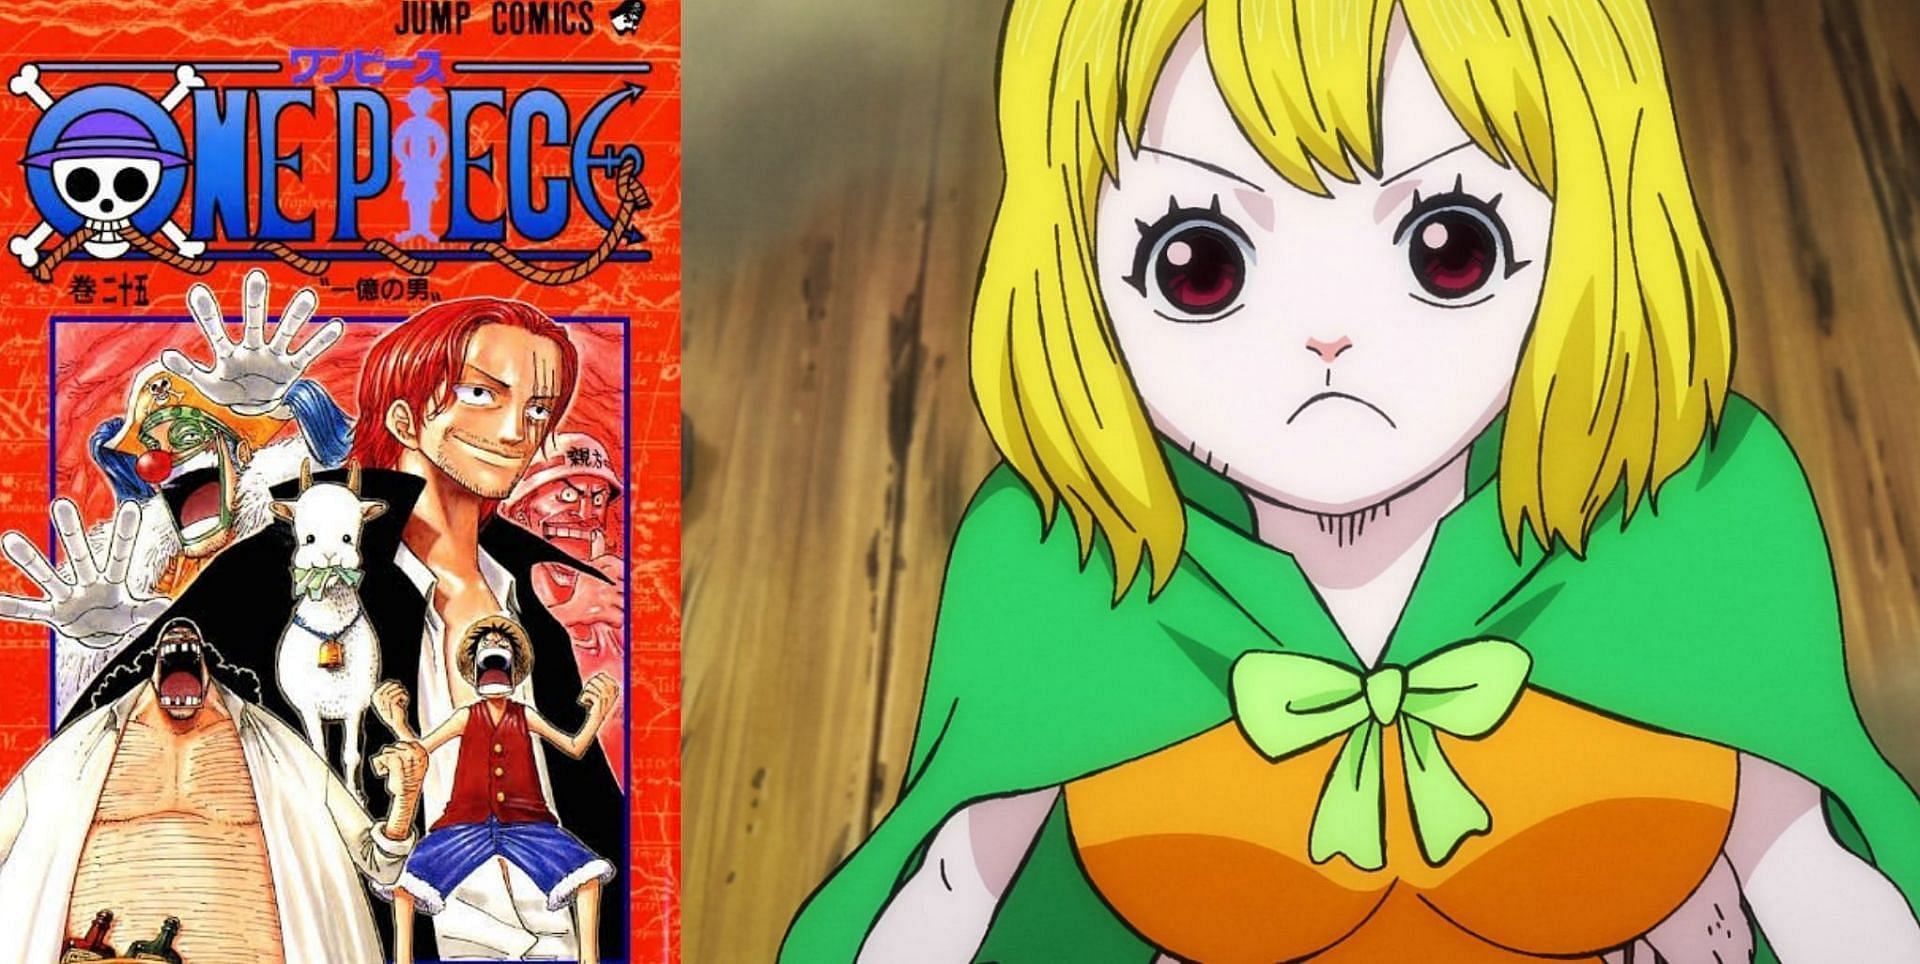 One Piece volume 105 cover features a surprising character alongside the  Yonko